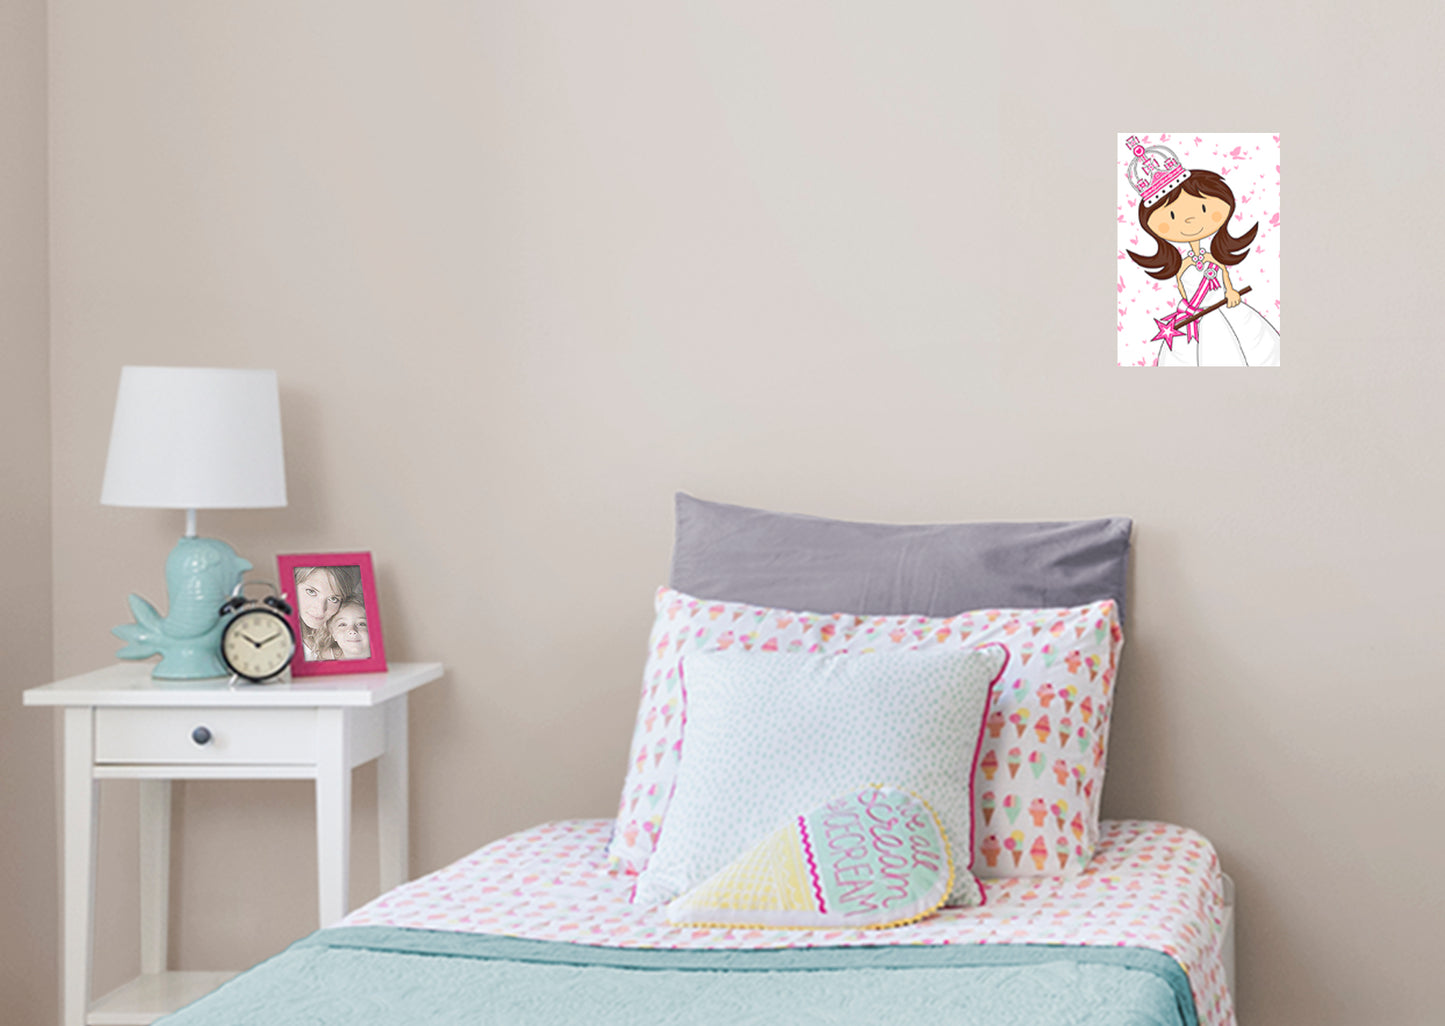 Nursery Princess:  White Dress Part 2 Mural        -   Removable Wall   Adhesive Decal